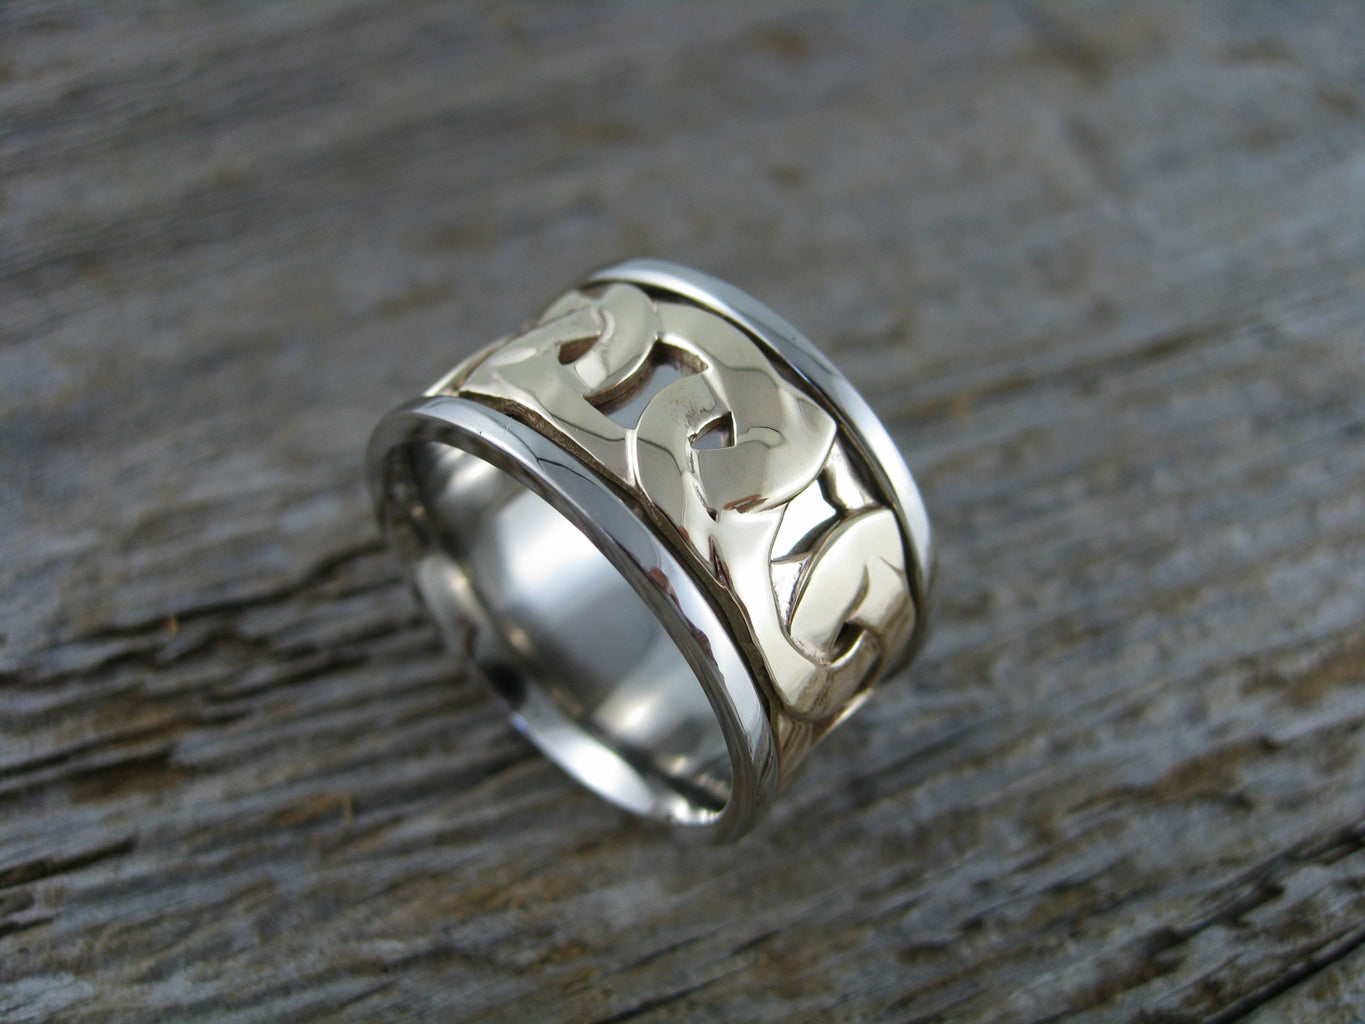 Custom Gold & Silver Jewellery in Vancouver, BC